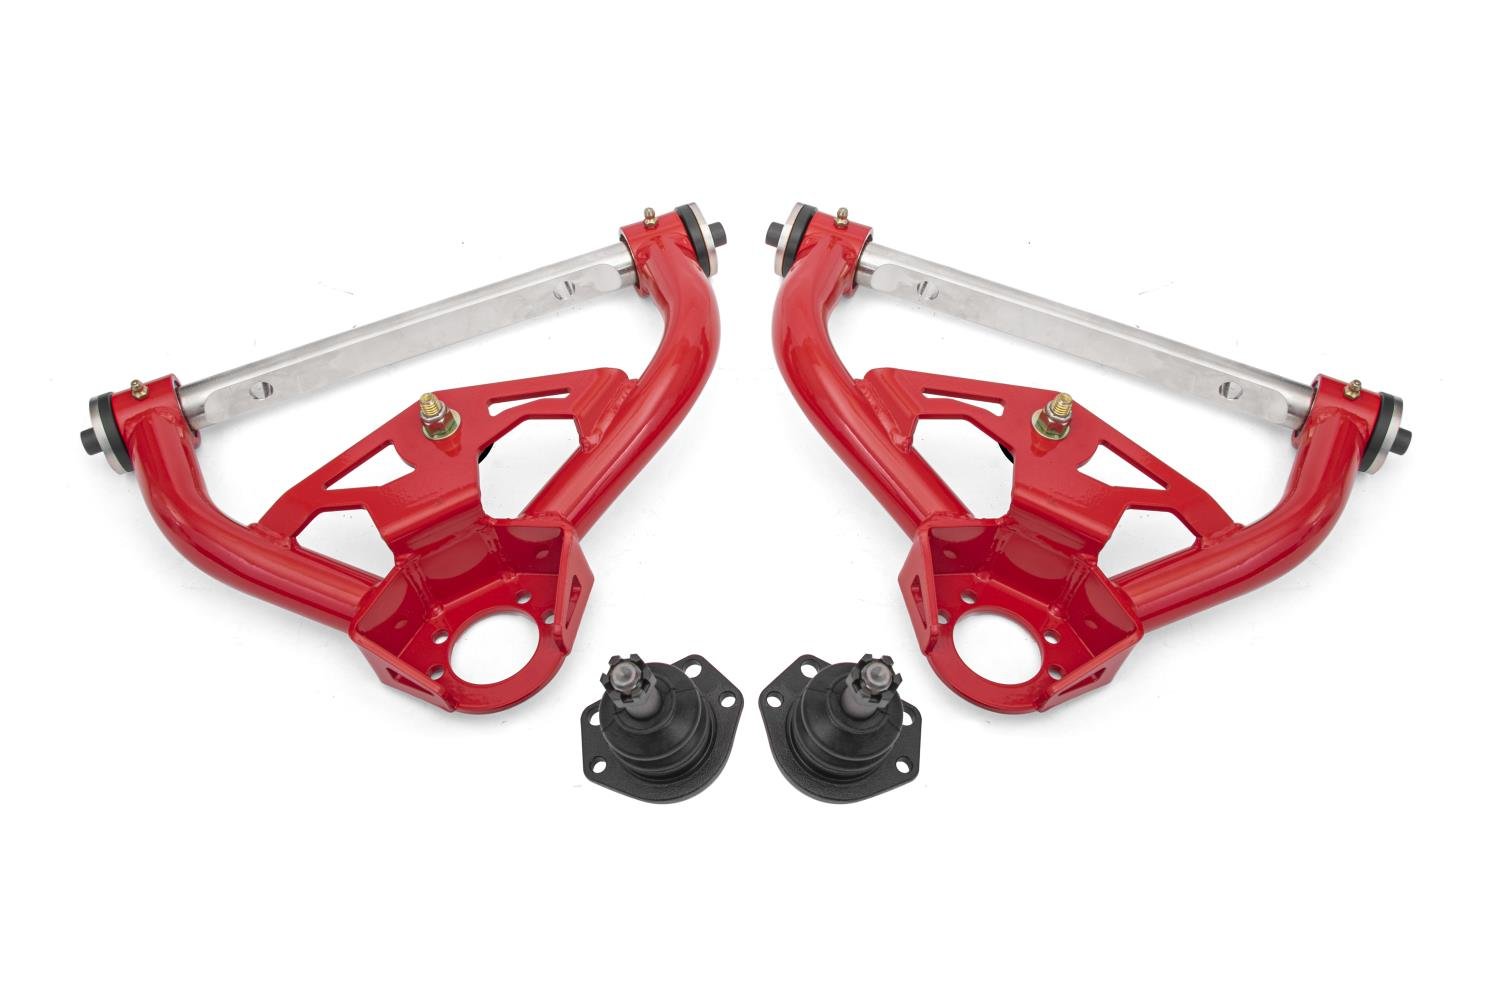 AAU461R Upper Control Arms w/Delrin Bushings & Std. Ball Joints for Select 1978-1987 GM Cars (Red)